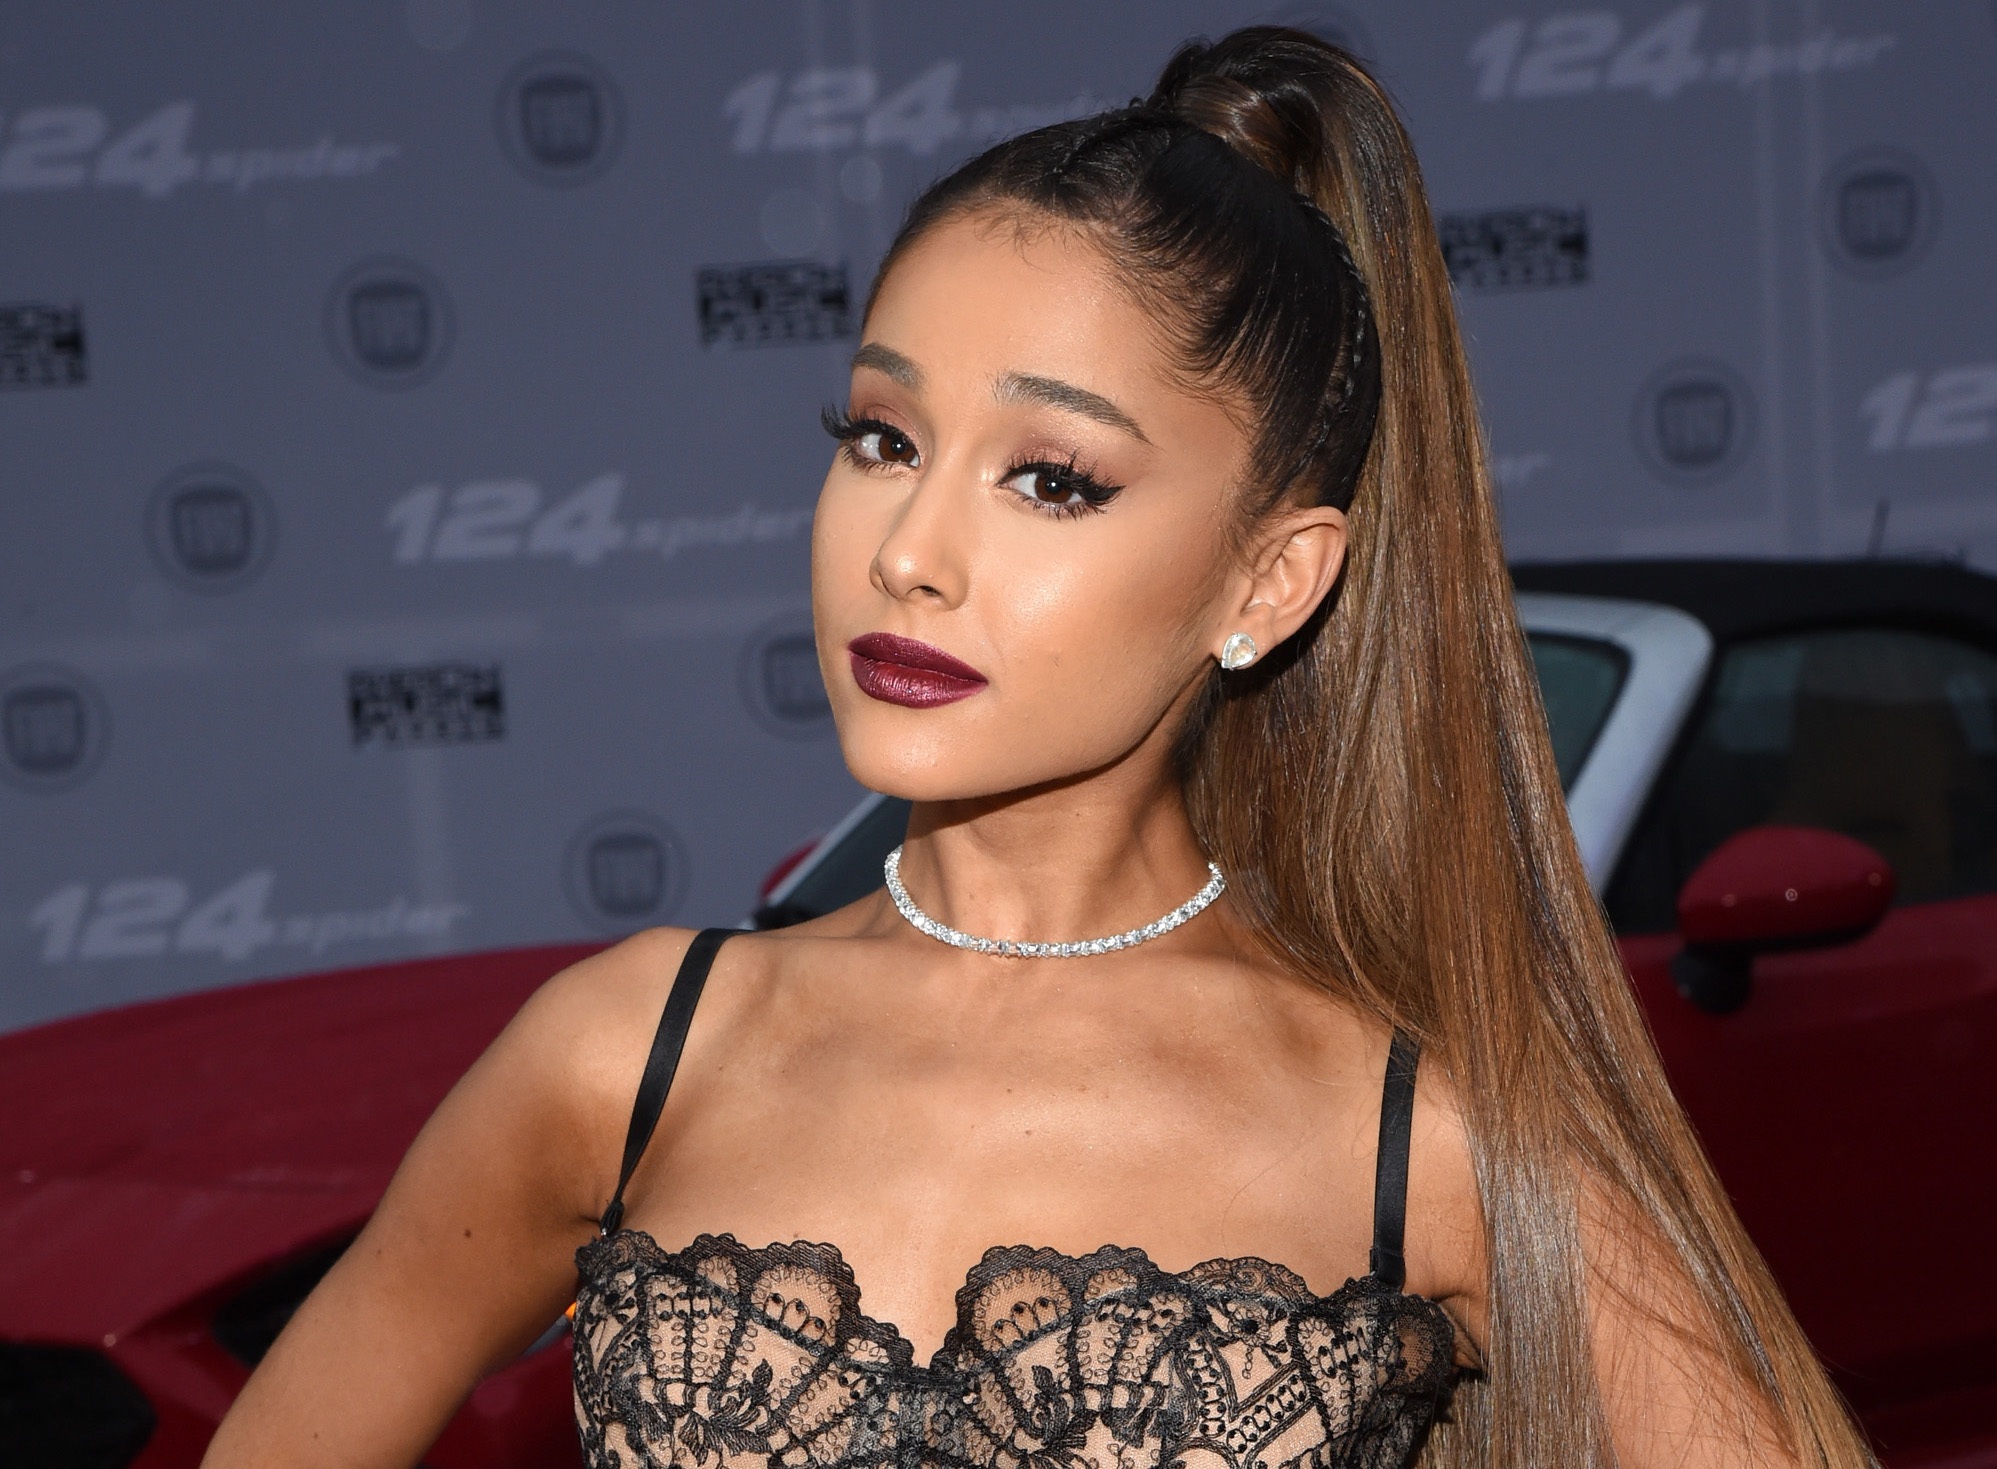 Ariana Grande Suffered a Breakdown After Manchester Concert Bombing